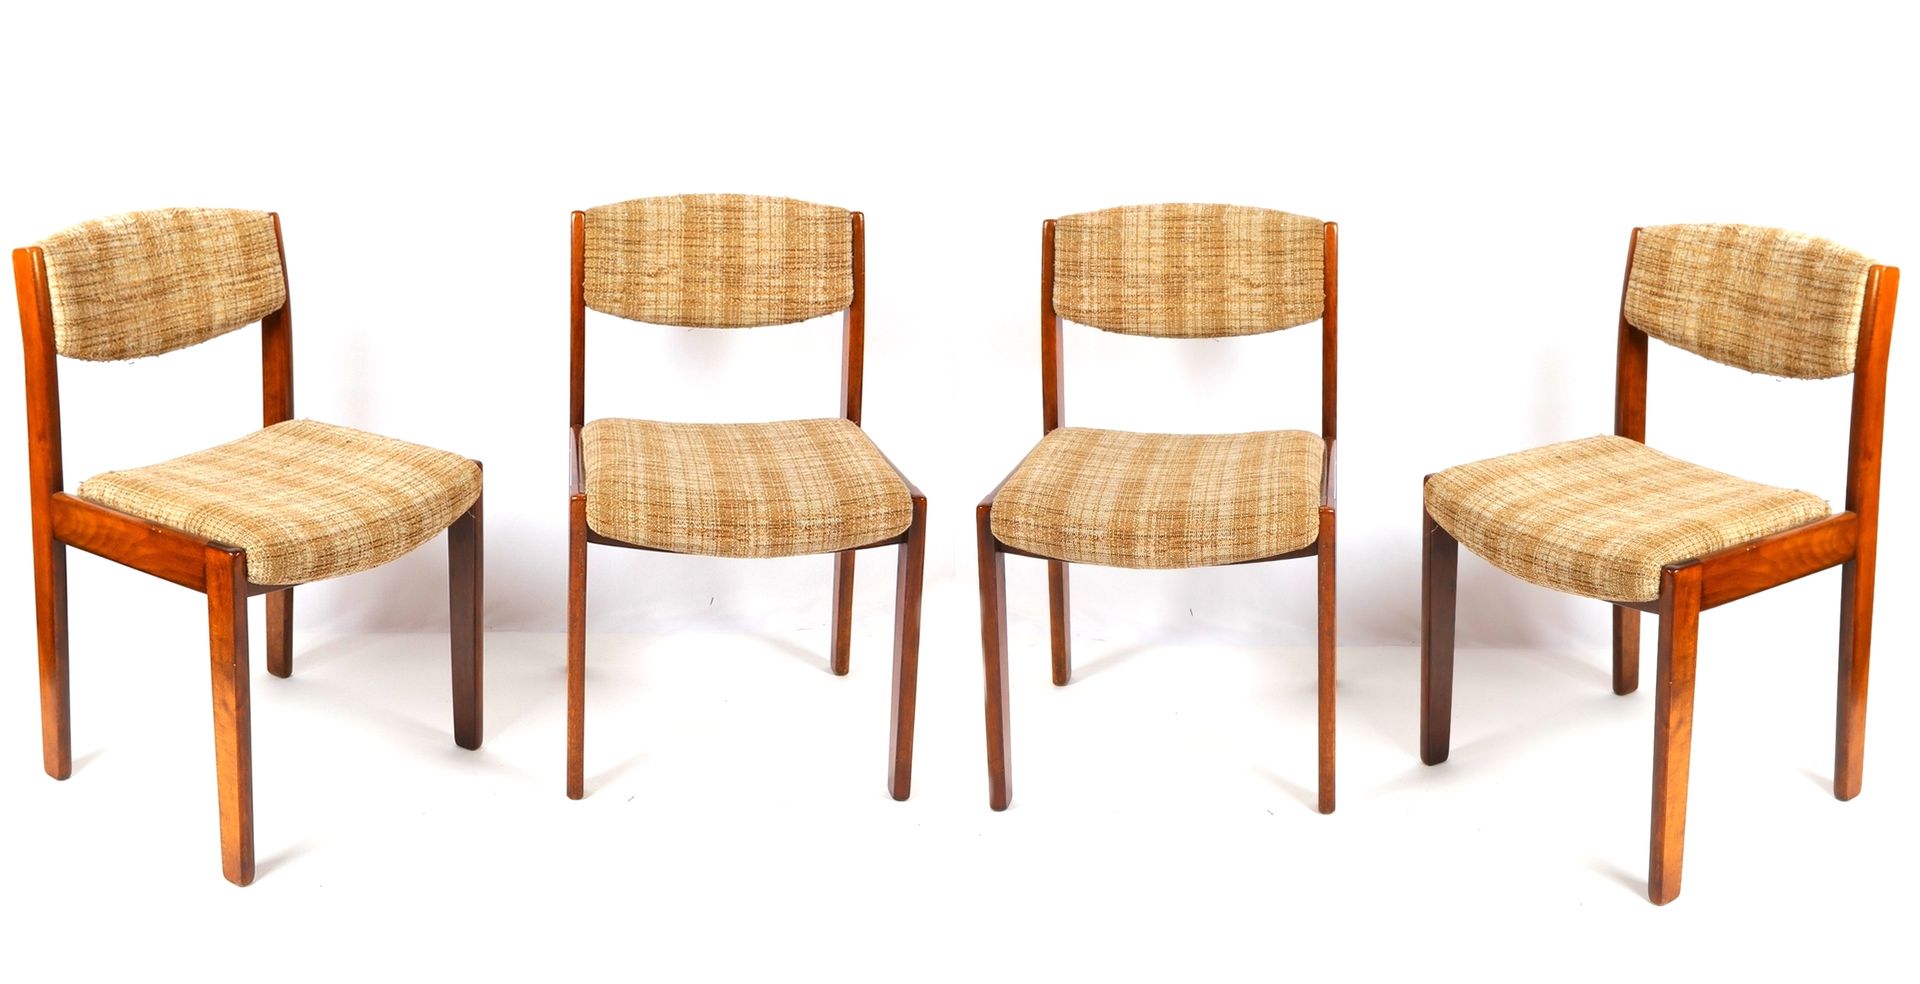 Null Scandinavian,Suite of 4 chairs in exotic wood, seat and back in woolen fabr&hellip;